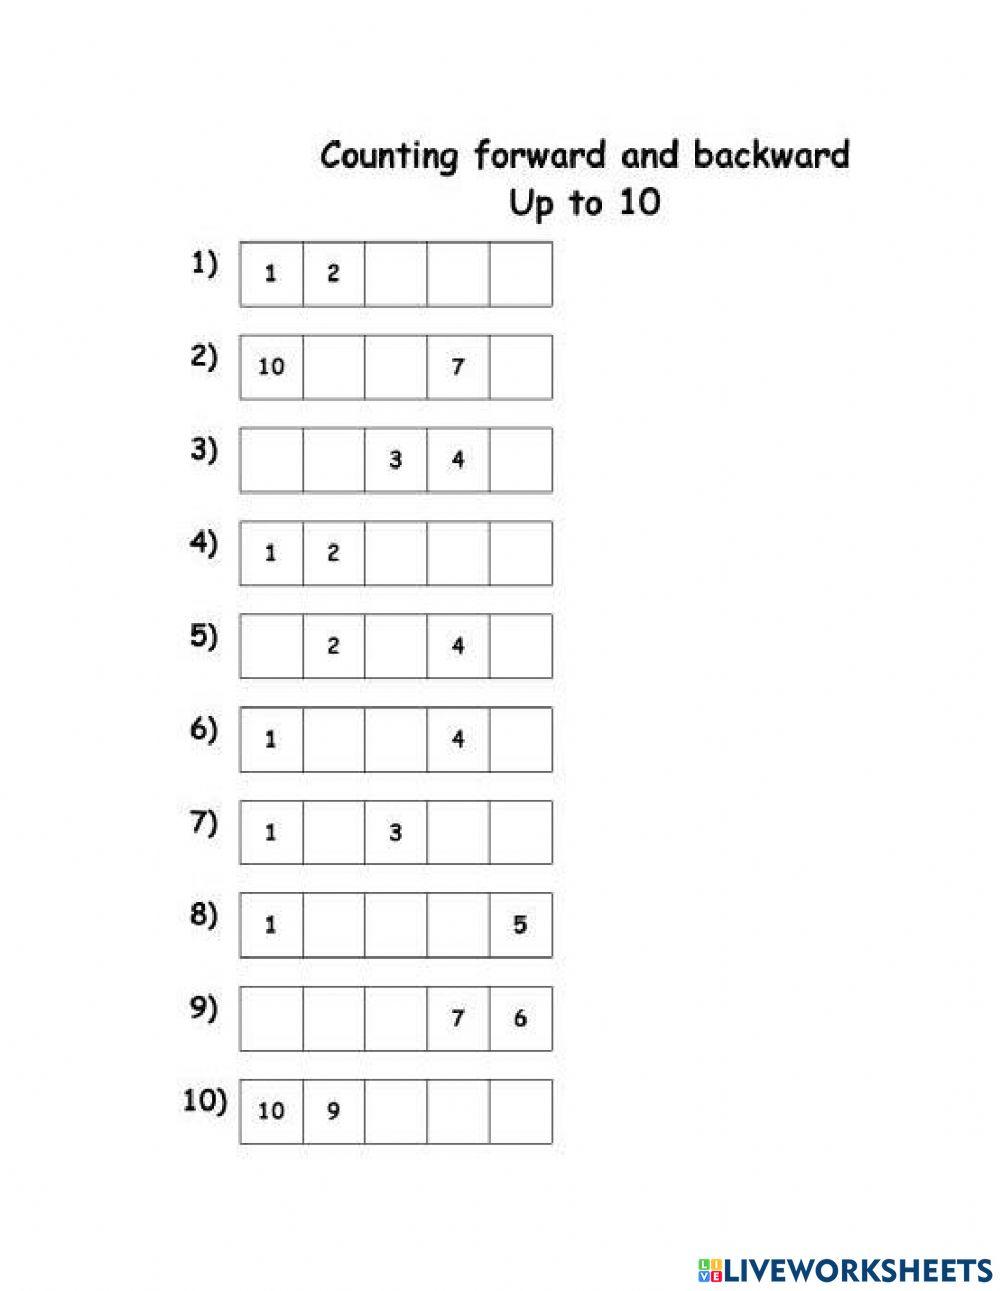 Counting Backwards And Forwards up to 10